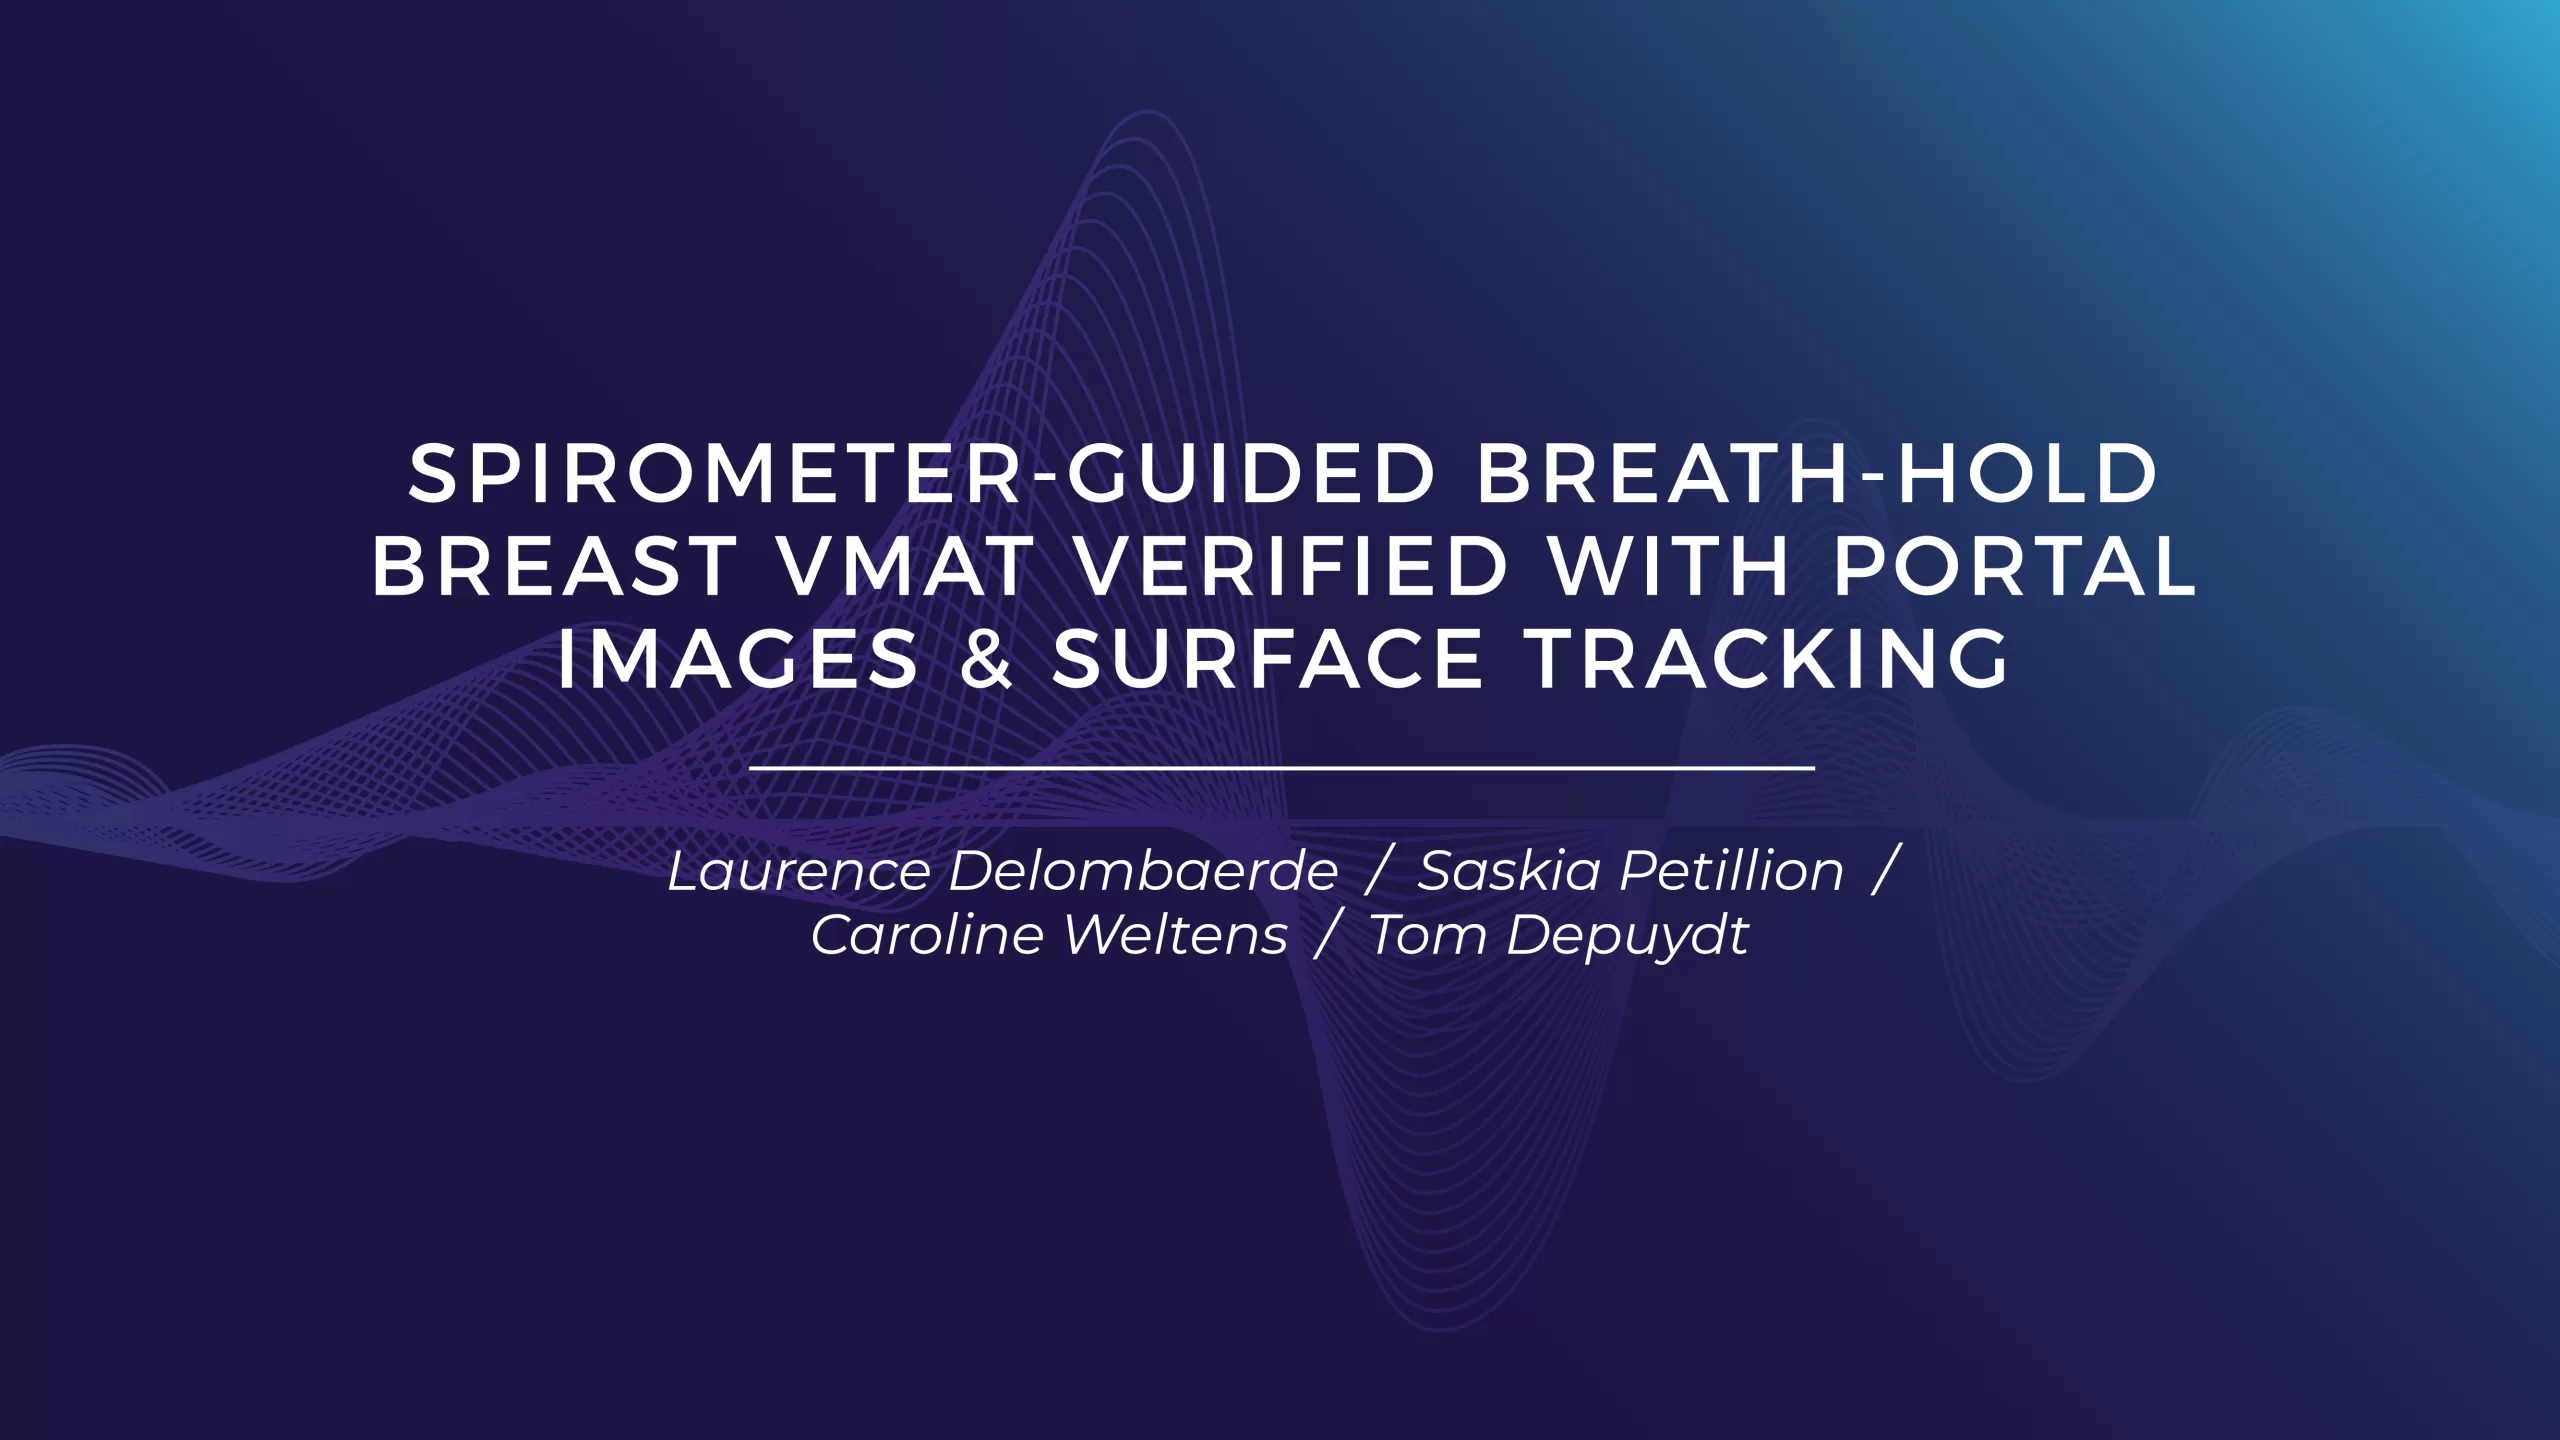 "Spirometer-Guided Breath-Hold Breast VMAT Verified with Portal Images & Surface Tracking"